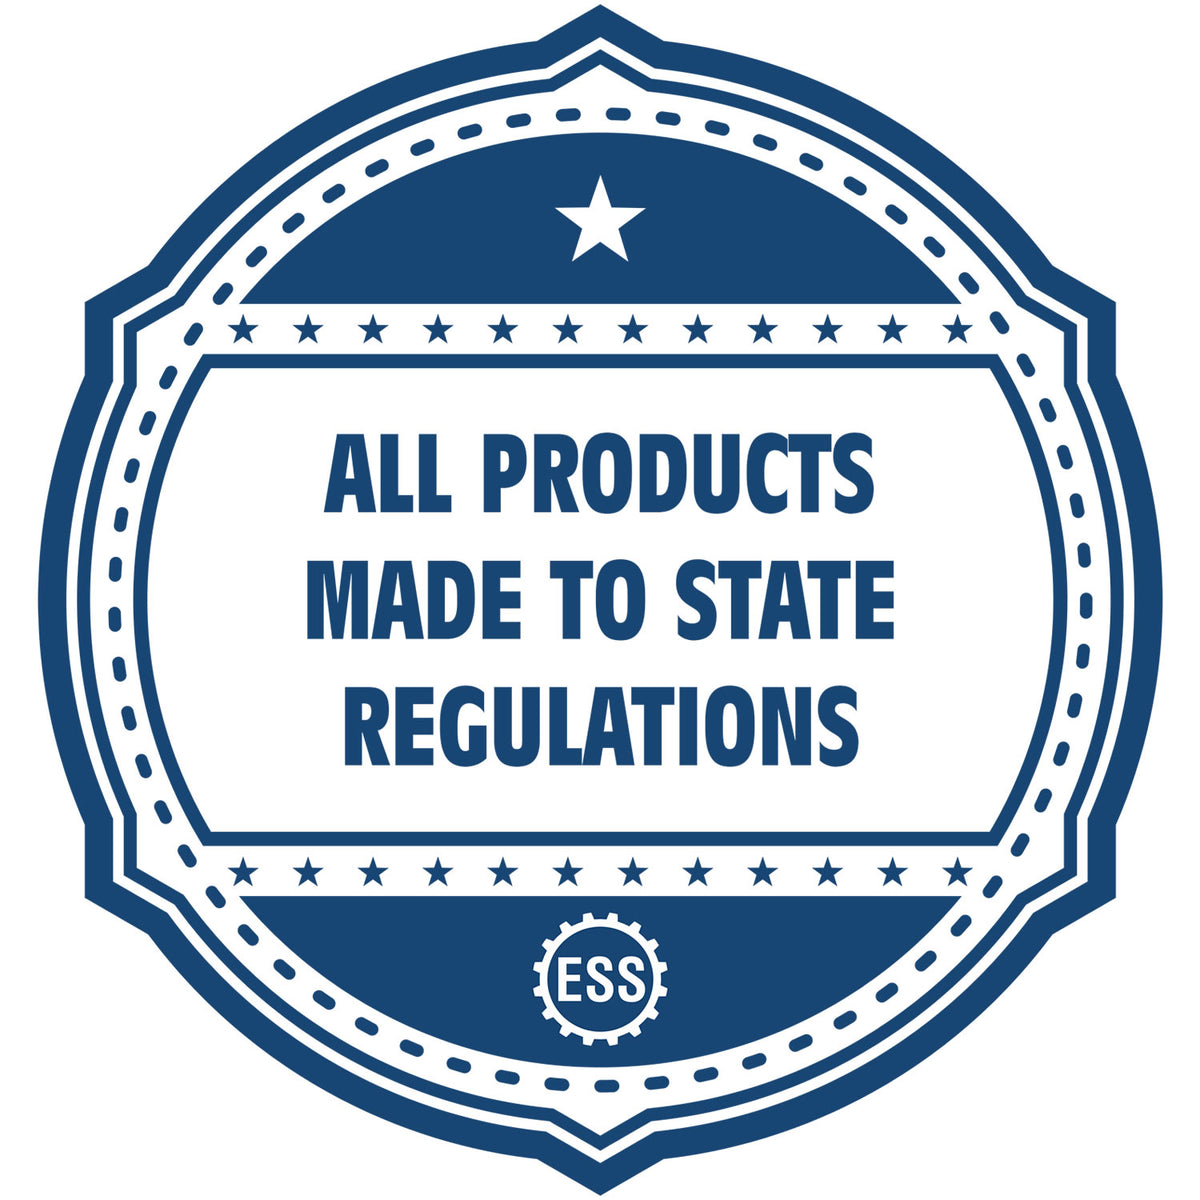 A blue icon or badge for the Nebraska Professional Geologist Seal Stamp showing that this product is made in compliance with state regulations.